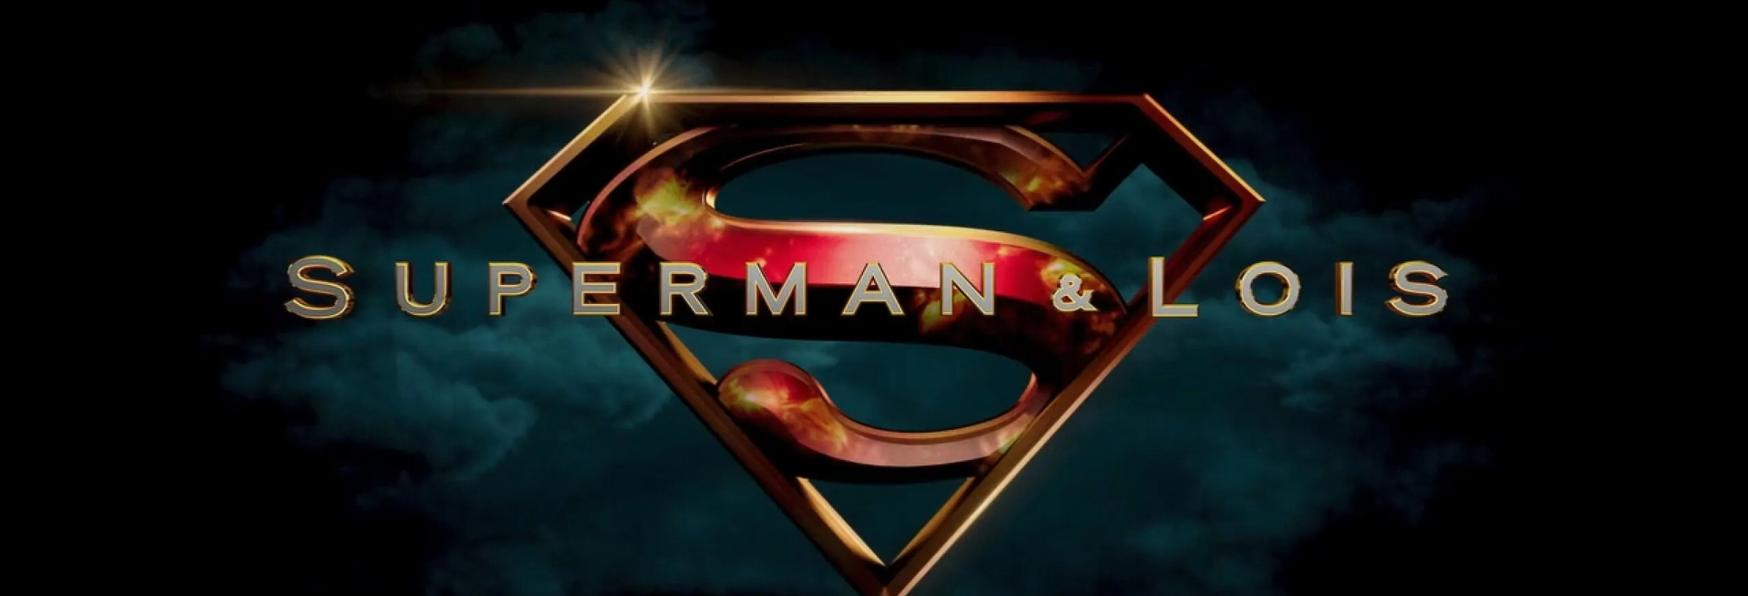 Superman & Lois 3: The CW releases the First Trailer of the unreleased Season